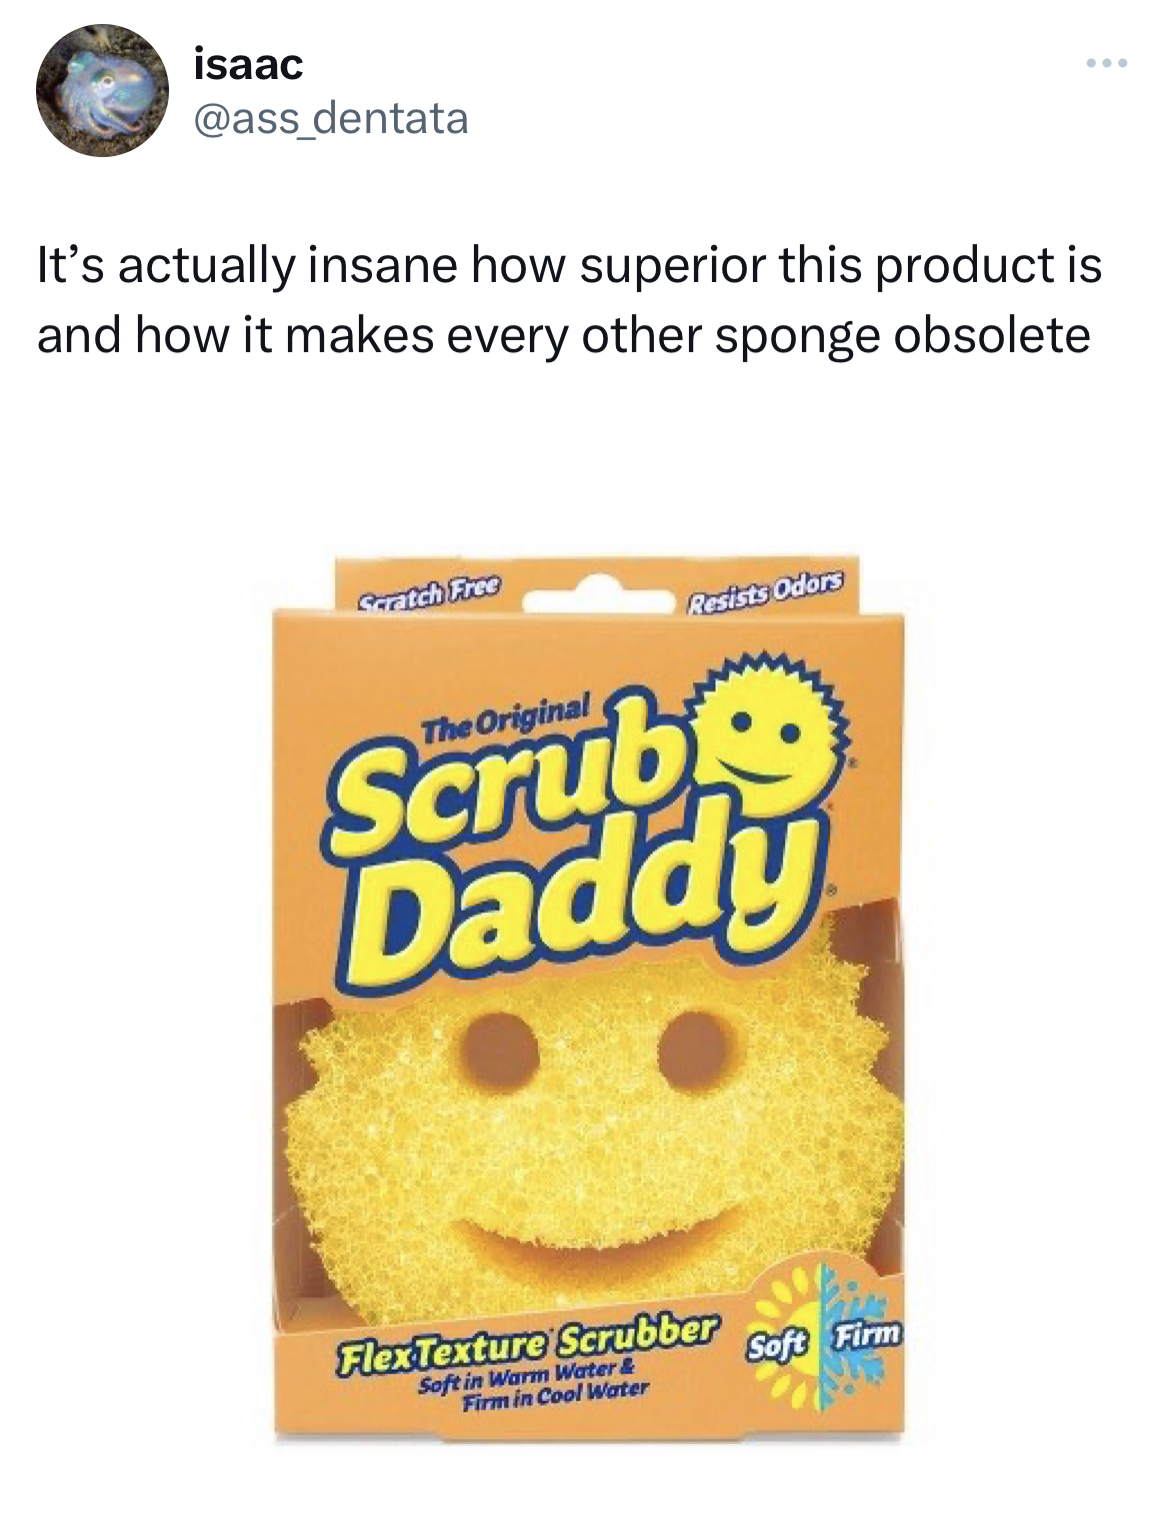 hall of fame tweets -scrub daddy - isaac It's actually insane how superior this product is and how it makes every other sponge obsolete Cwrich love The Original Resists Odars Daddy FlexTexture Scrubber Seft in Warm Water & Firm in Cool Water Soft Firm